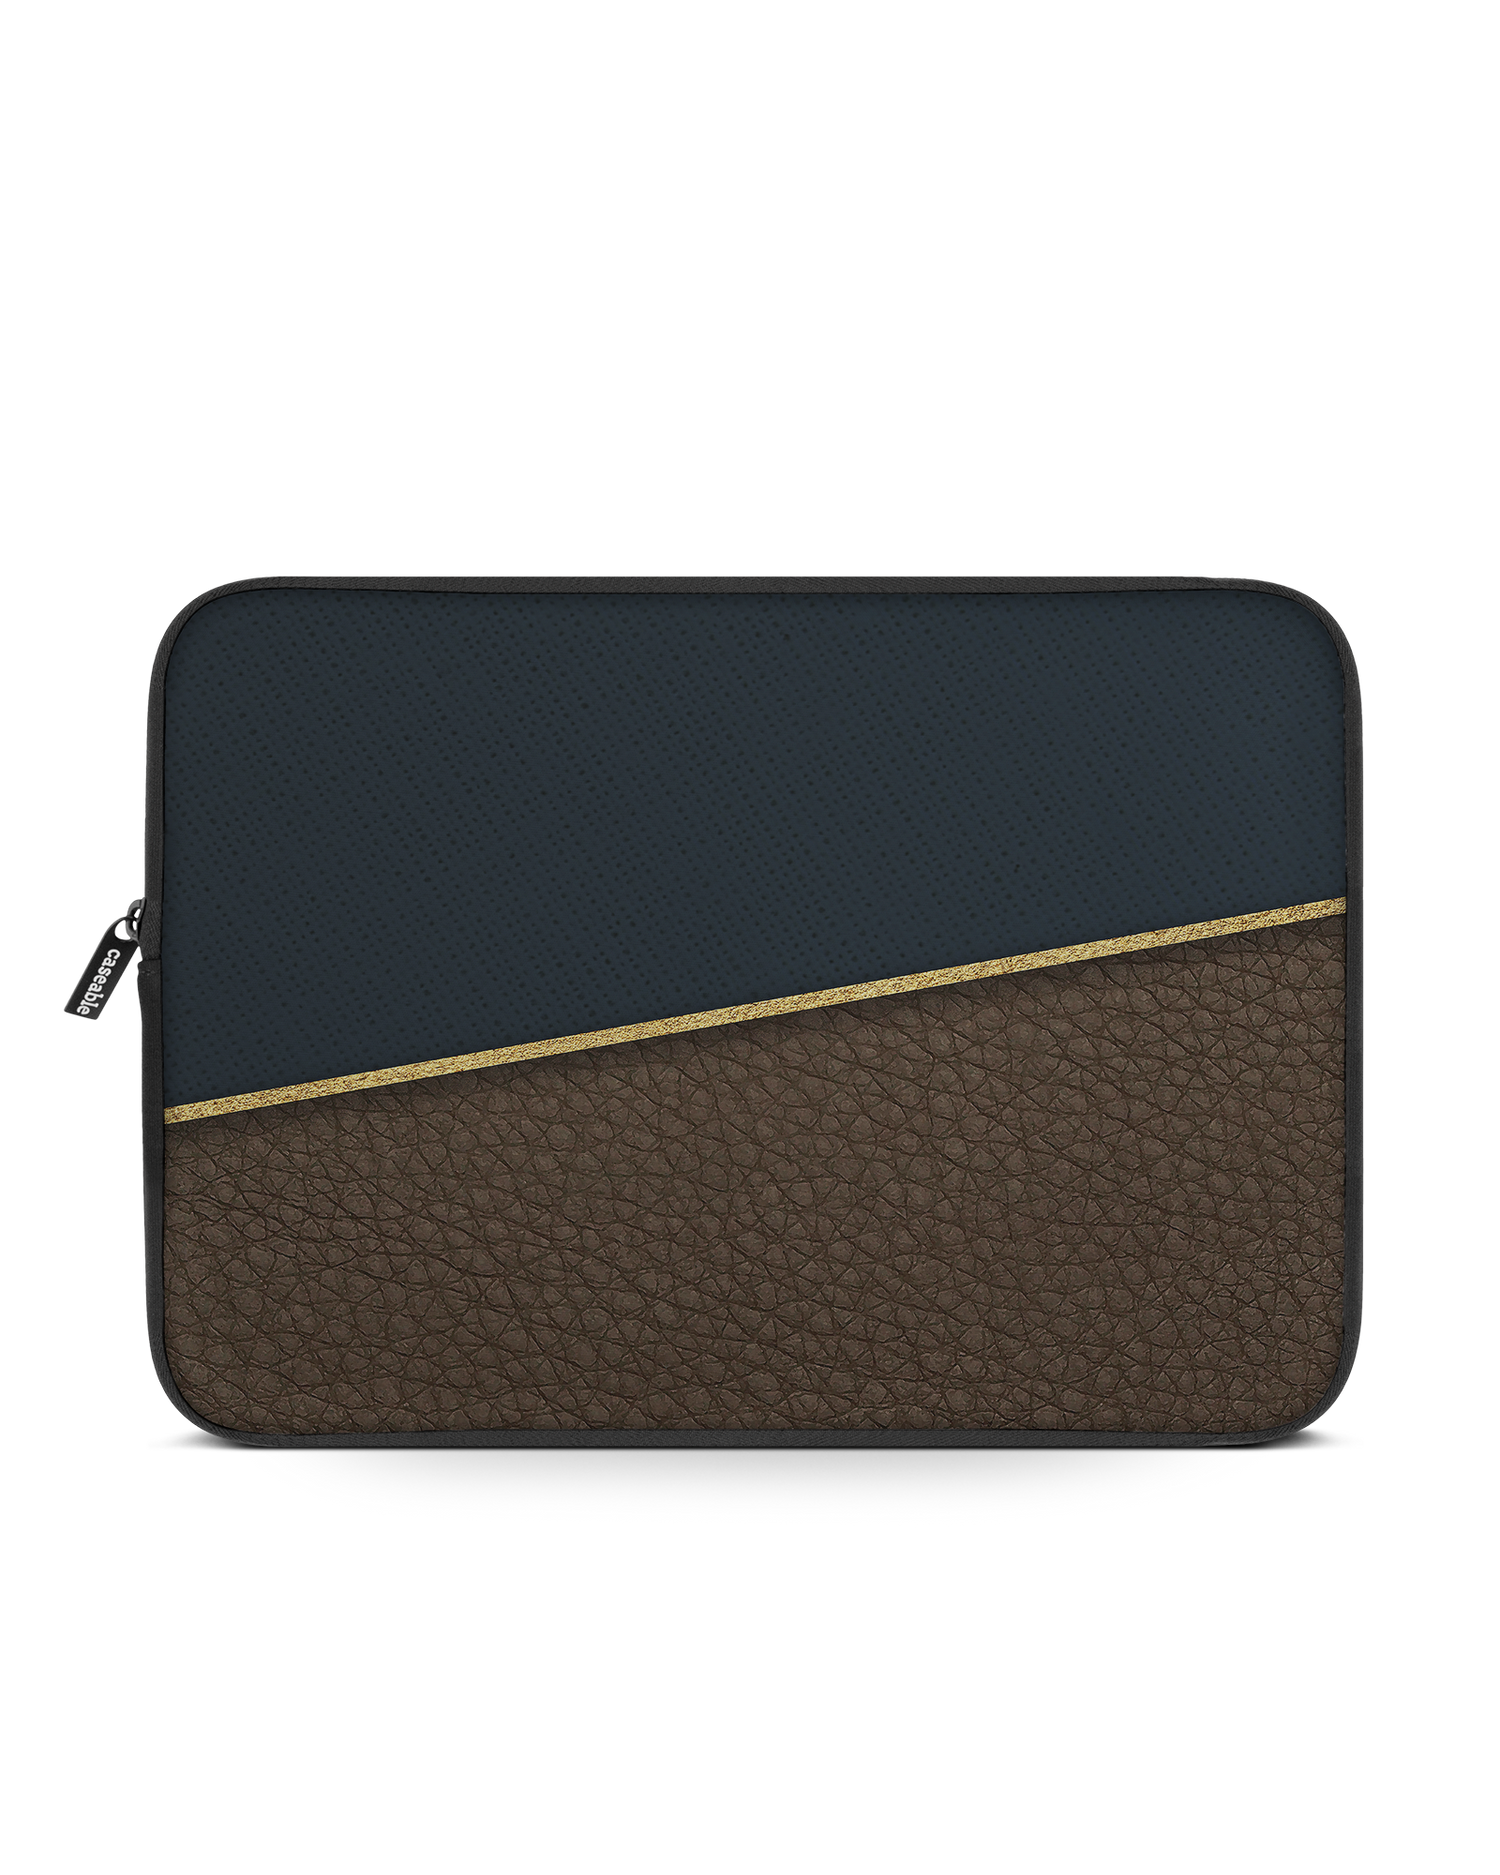 Oxford Laptop Case 16 inch: Front View